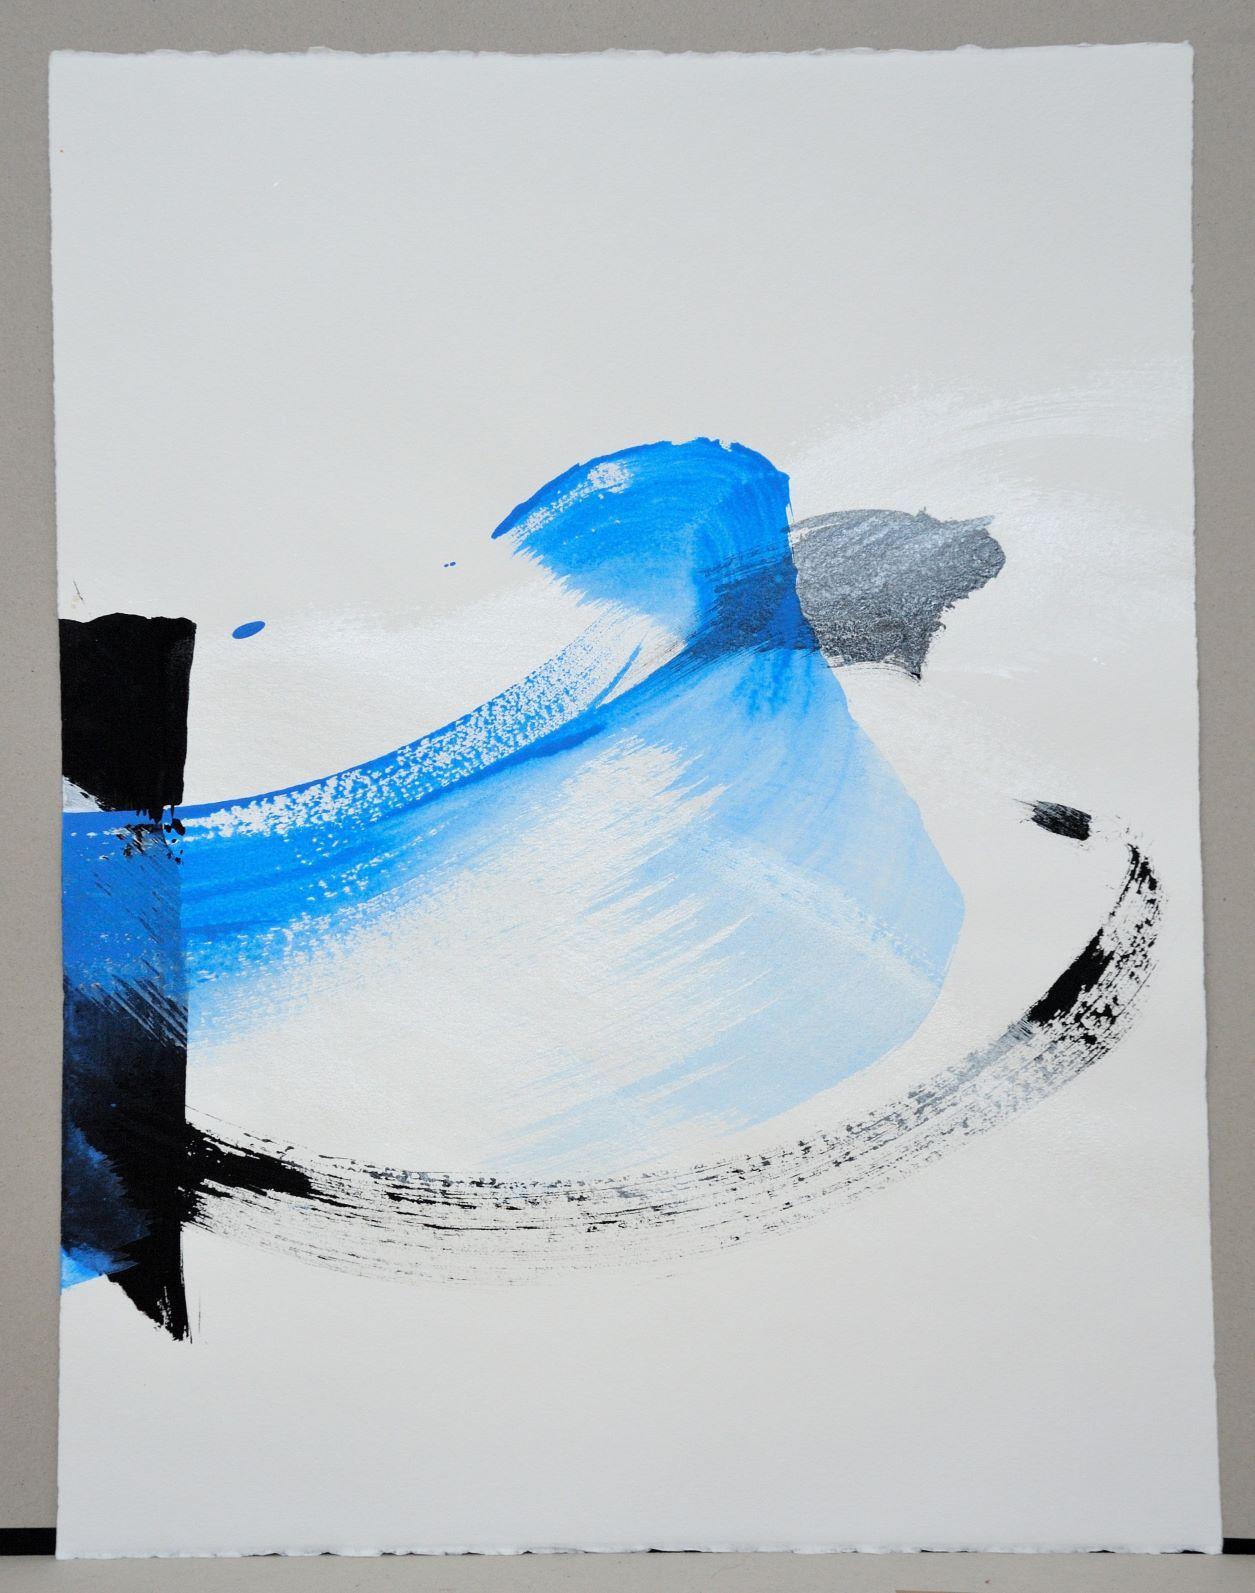 Permanescence N548-D by Hachiro Kanno - Calligraphy-based abstract work on paper For Sale 3